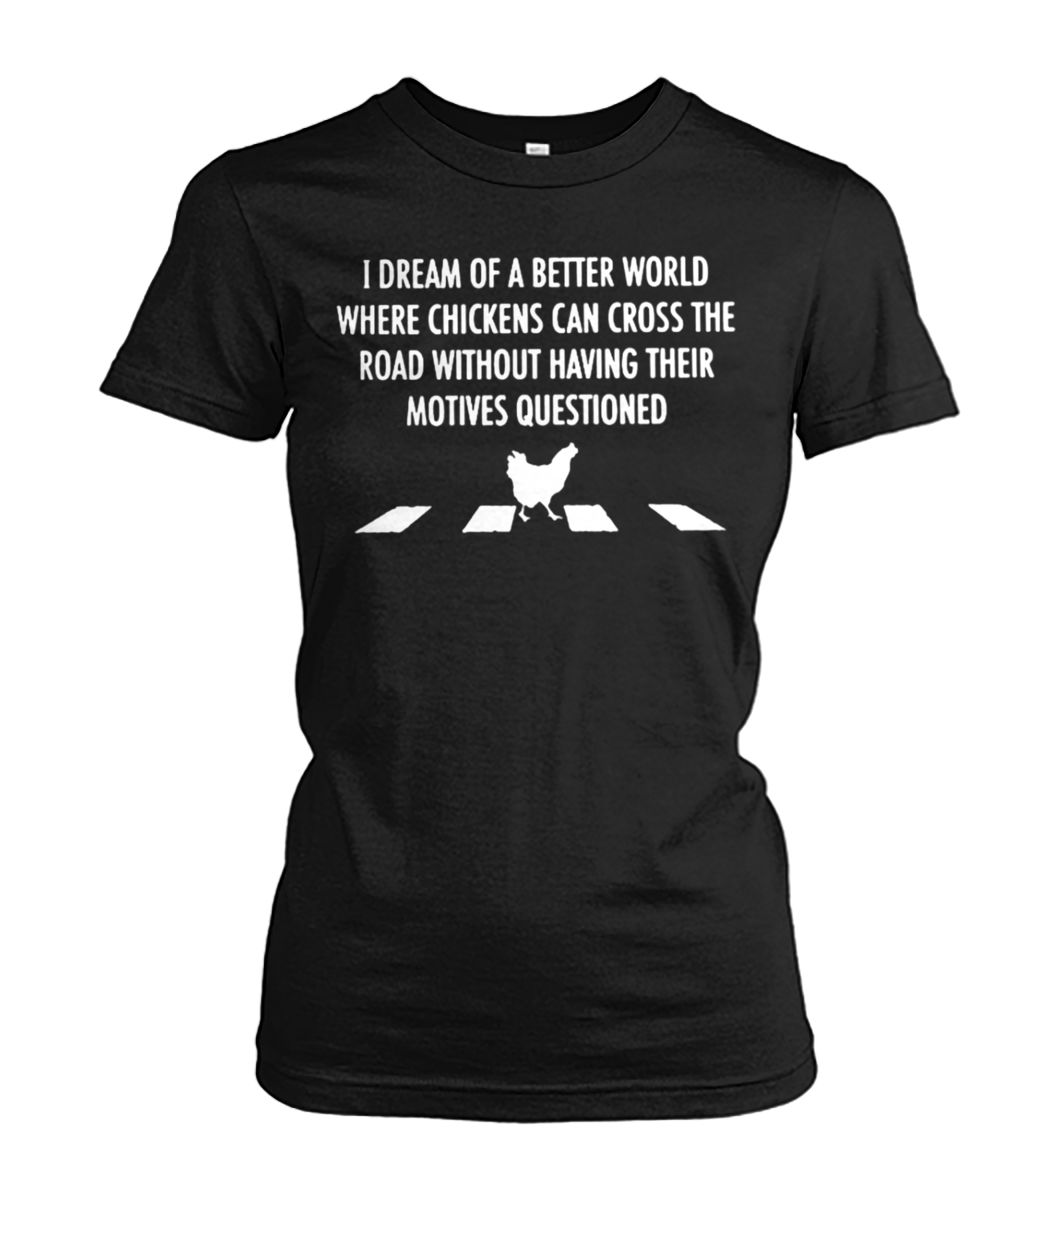 I dream of a better world where chickens can cross road women's crew tee